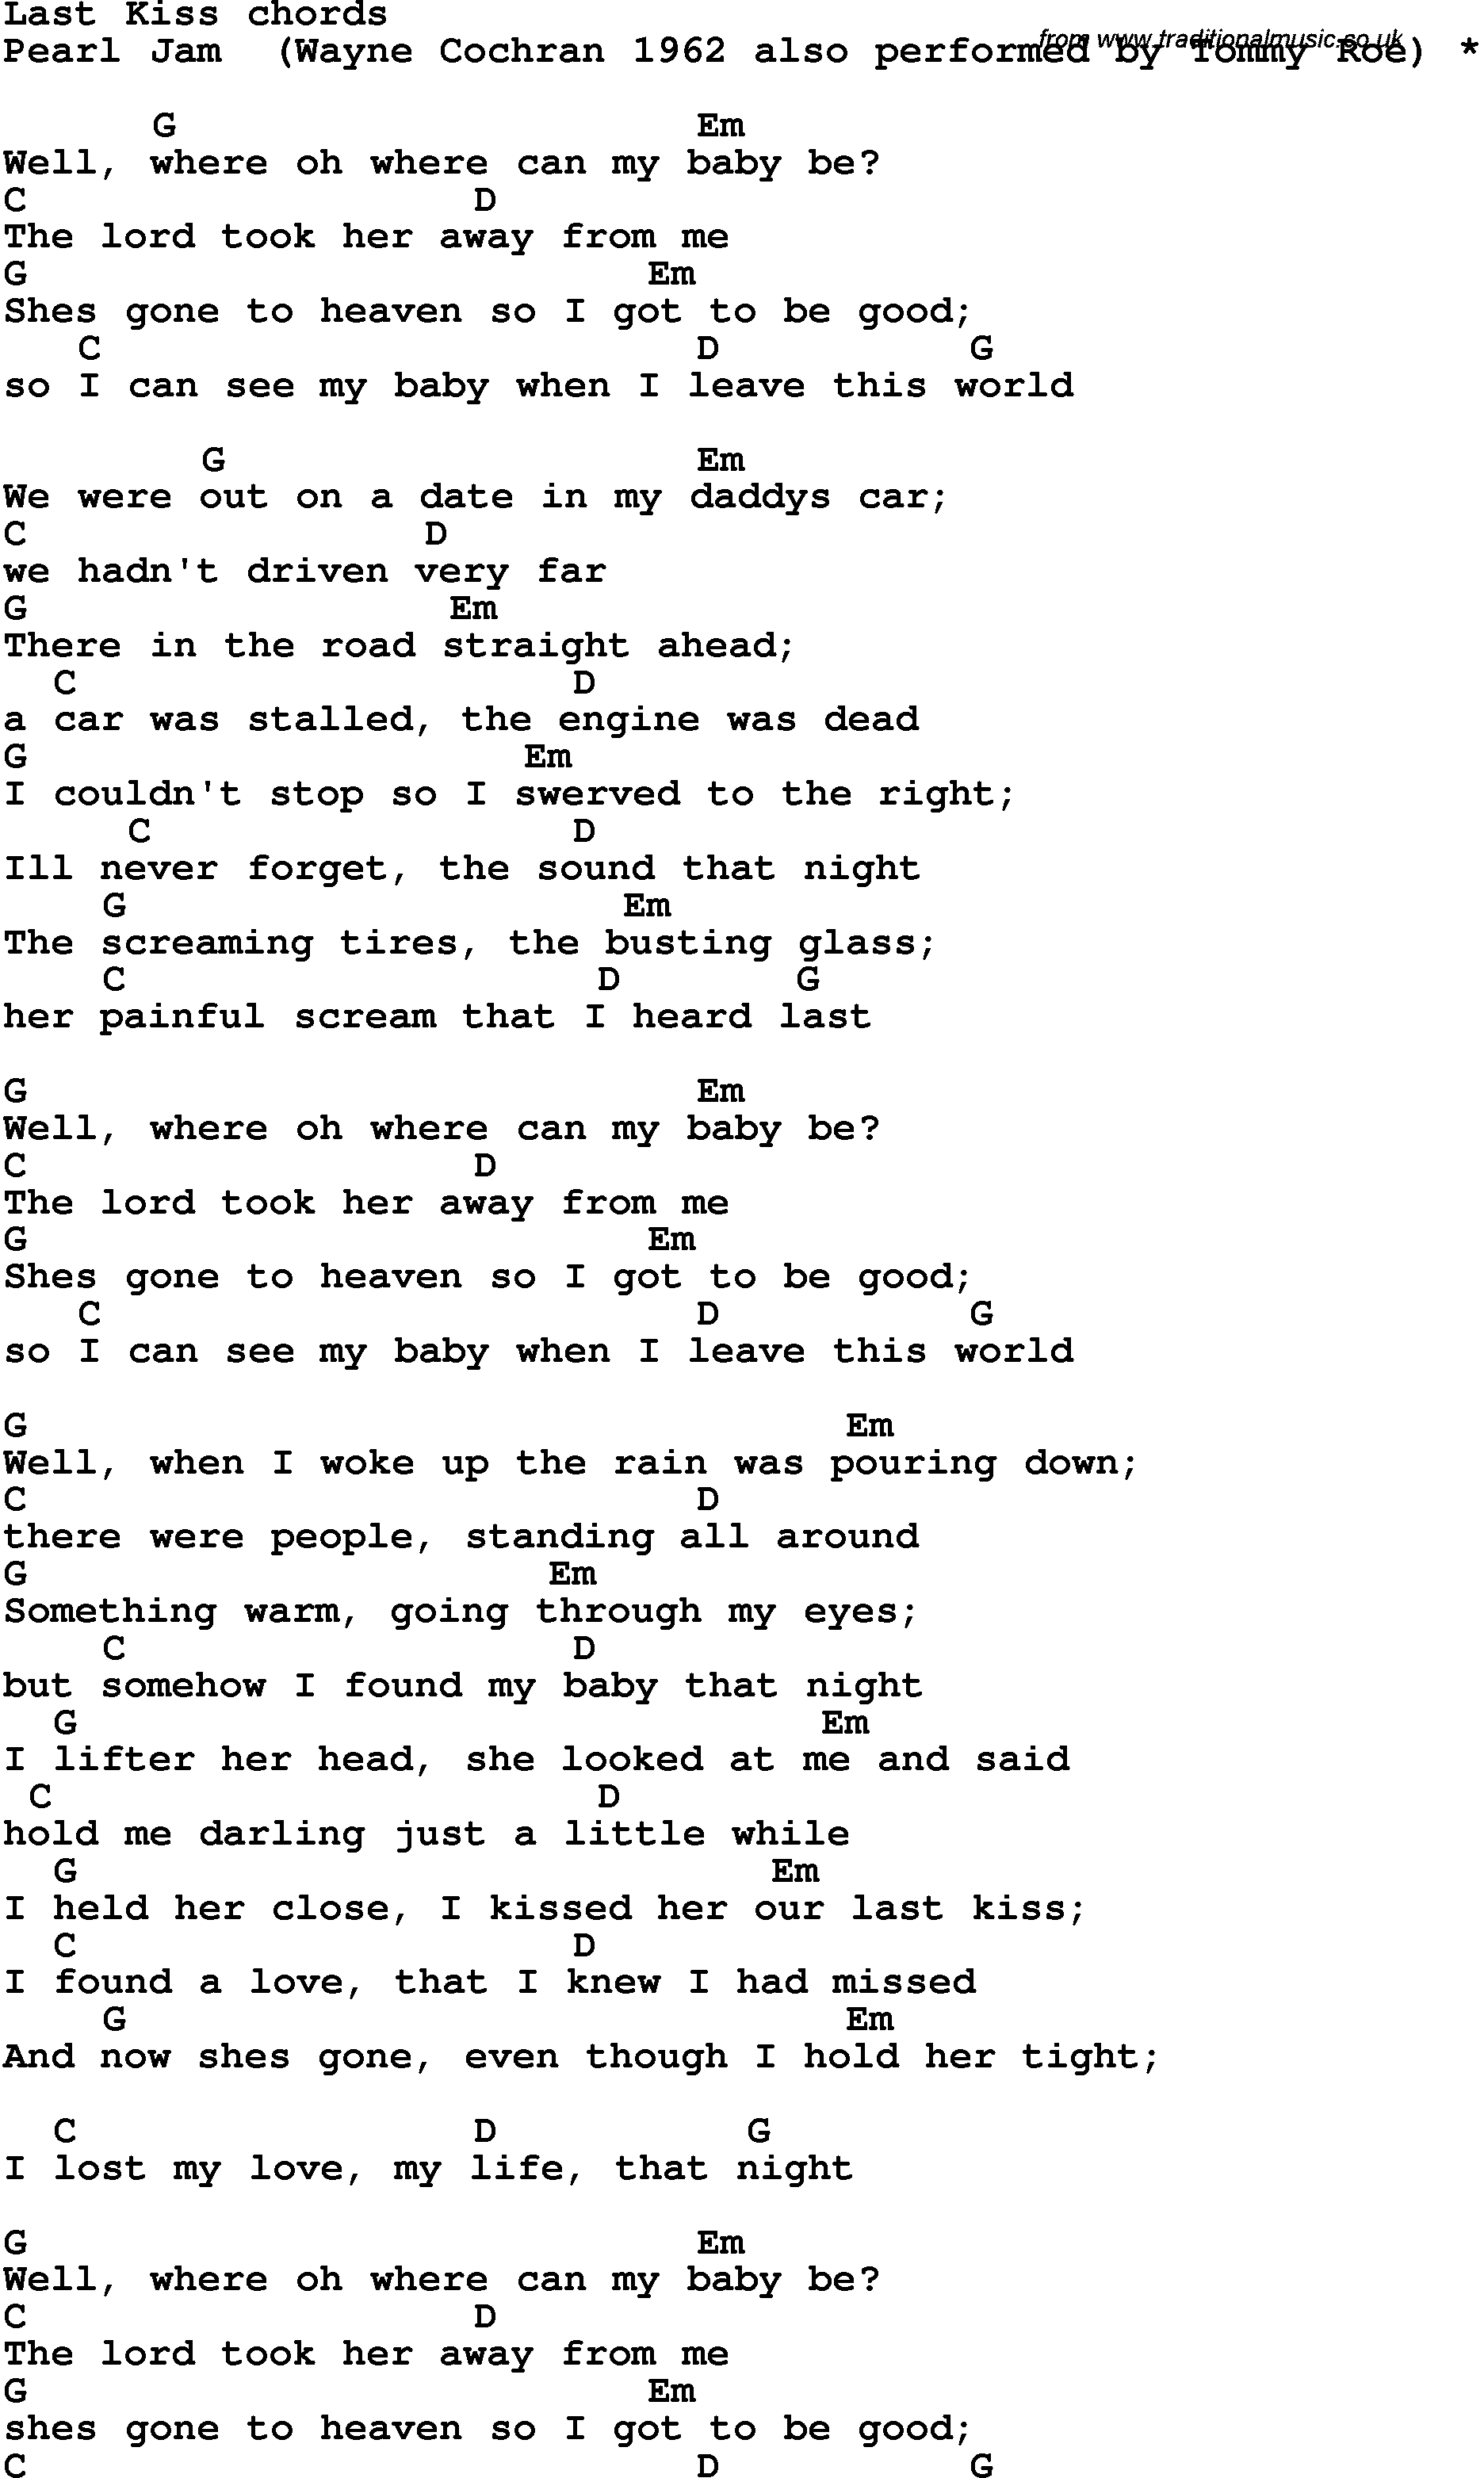 Song Lyrics with guitar chords for Last Kiss